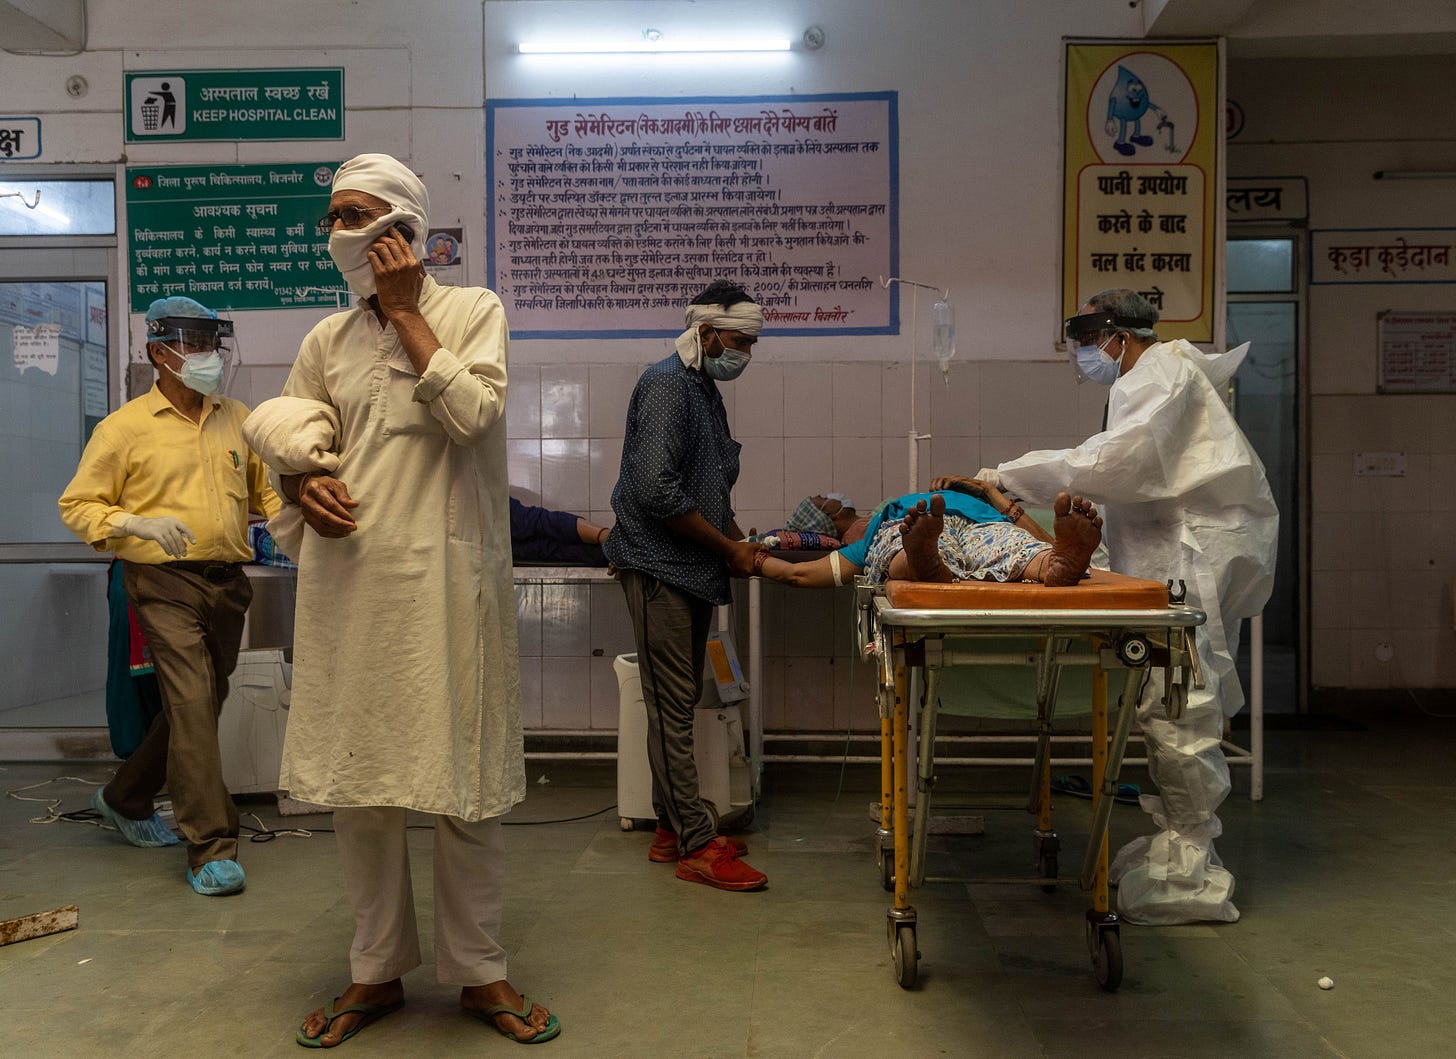 India's brutal COVID wave brings tragic scenes to small town hospital |  Reuters